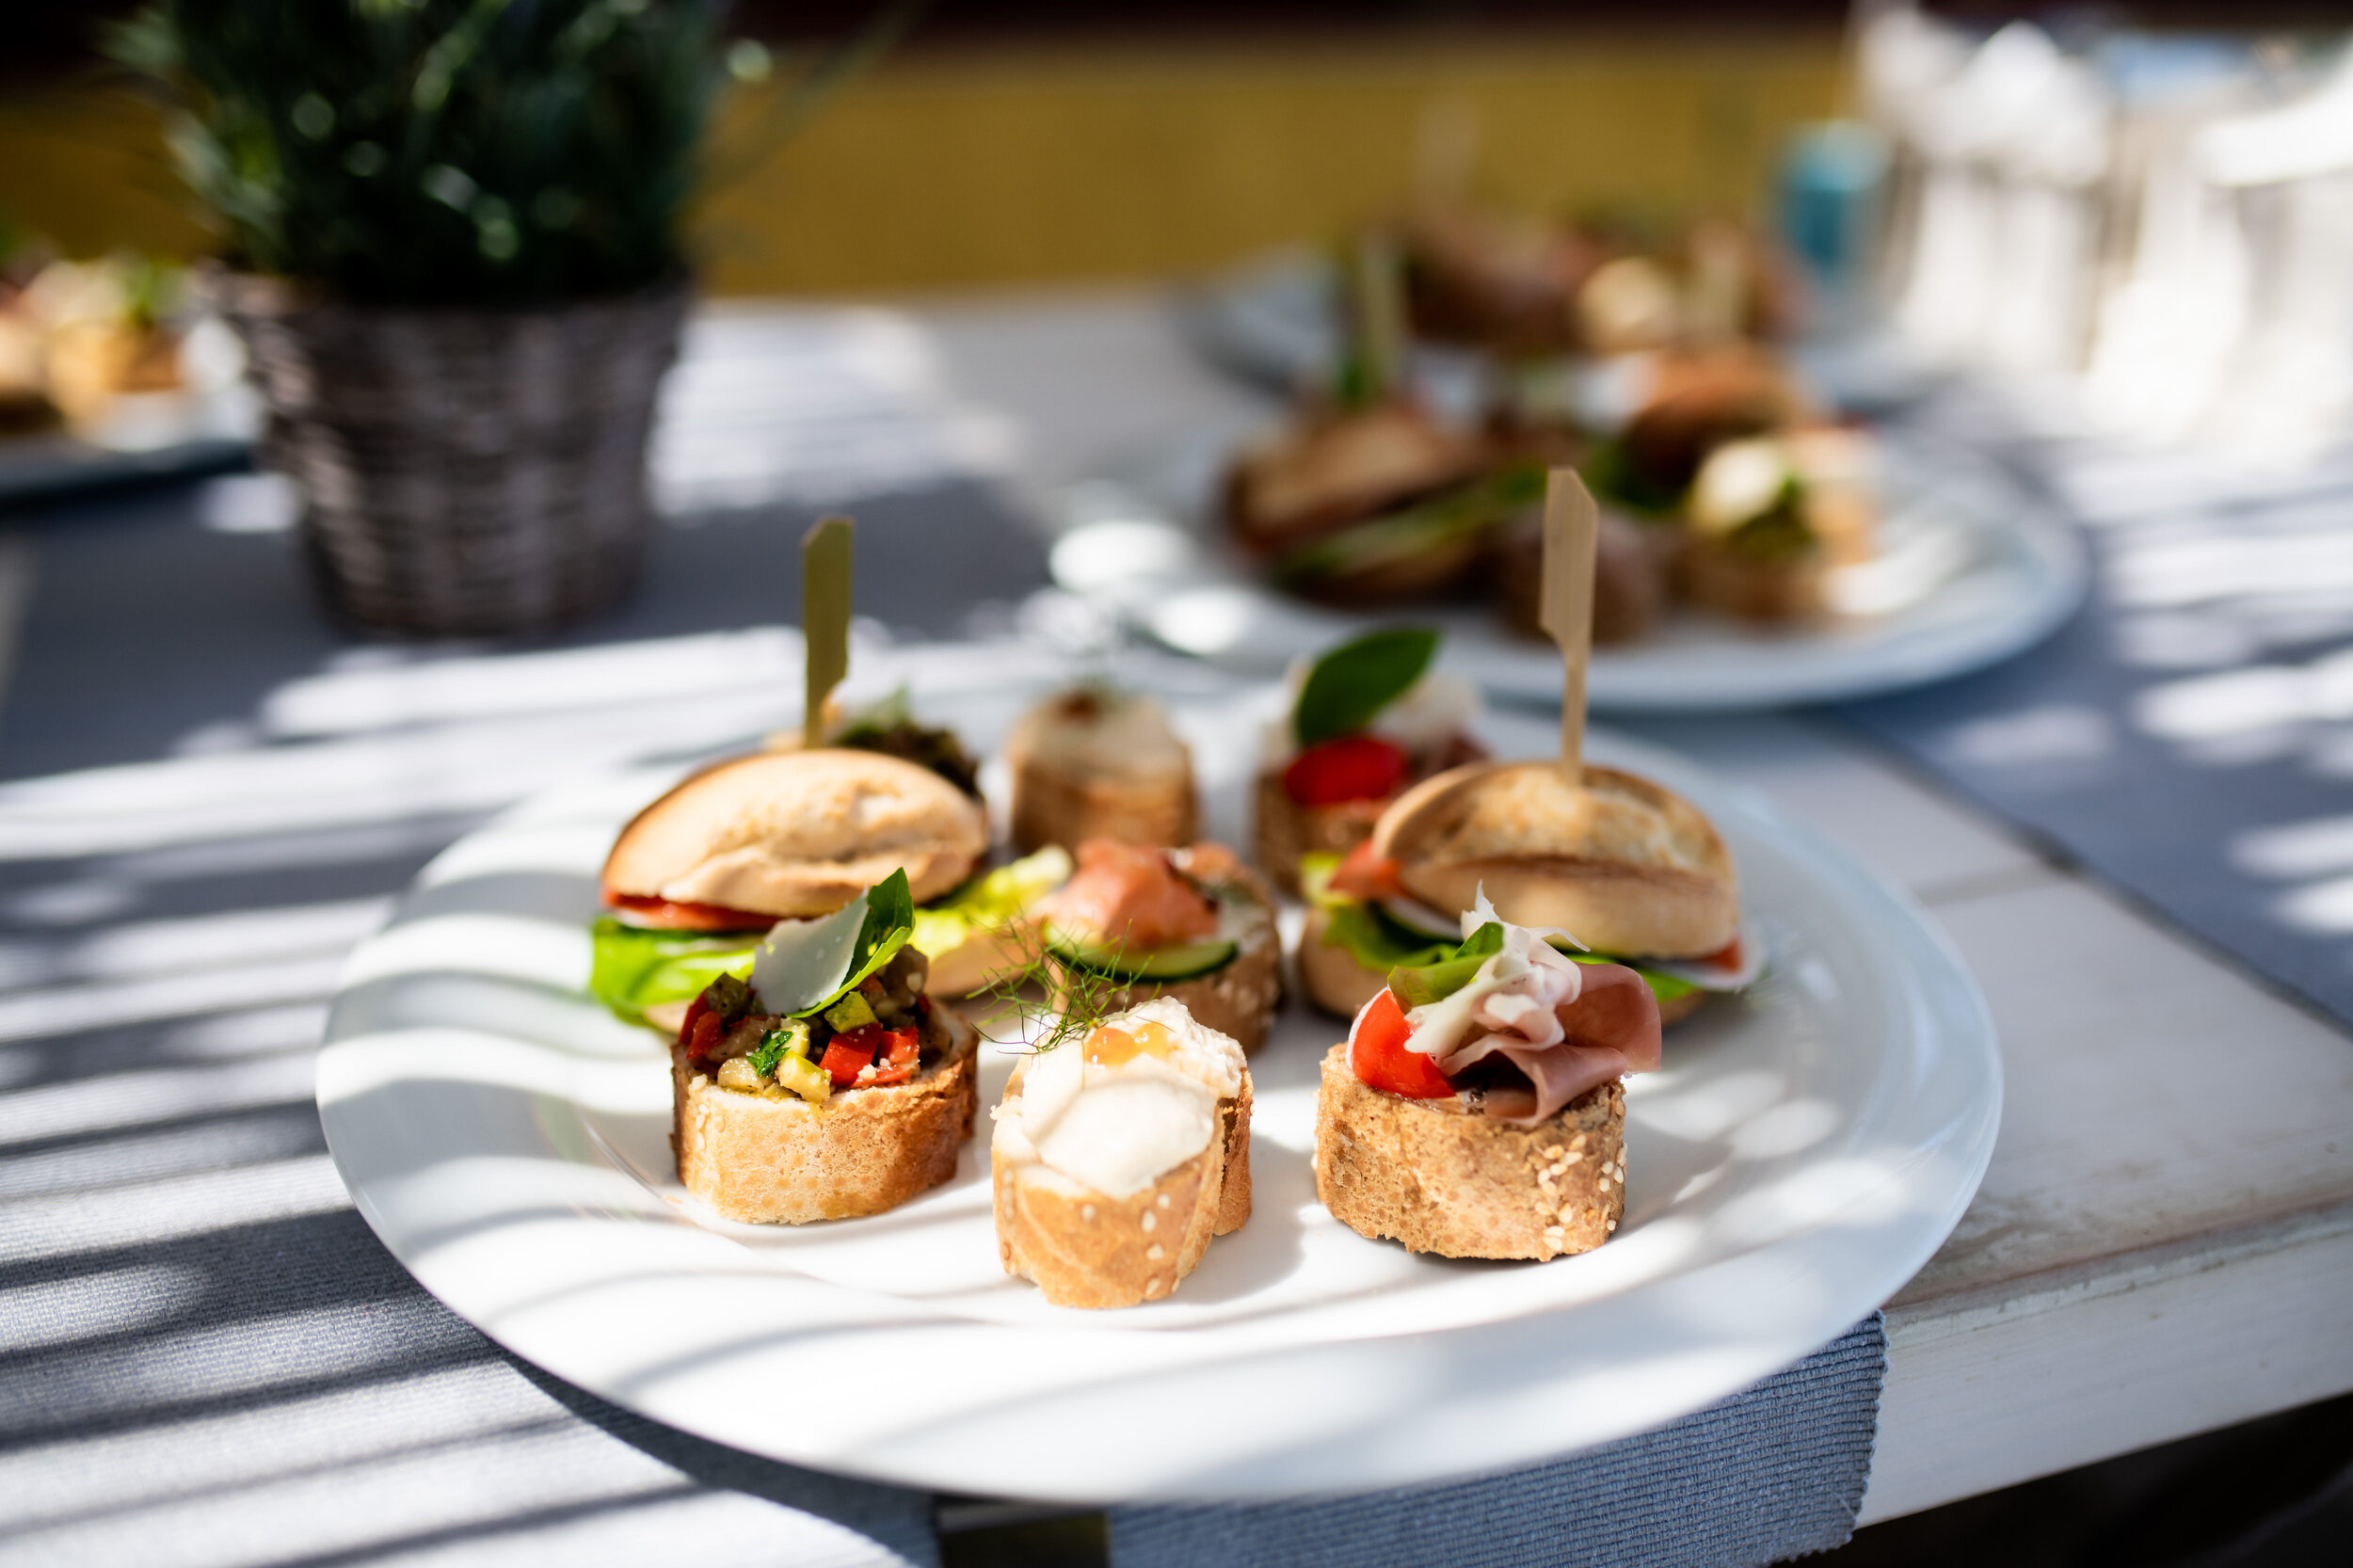 Appetizers during lunch at Paltsi Beach: photo of destination wedding in Greece by J. Brown Photography.